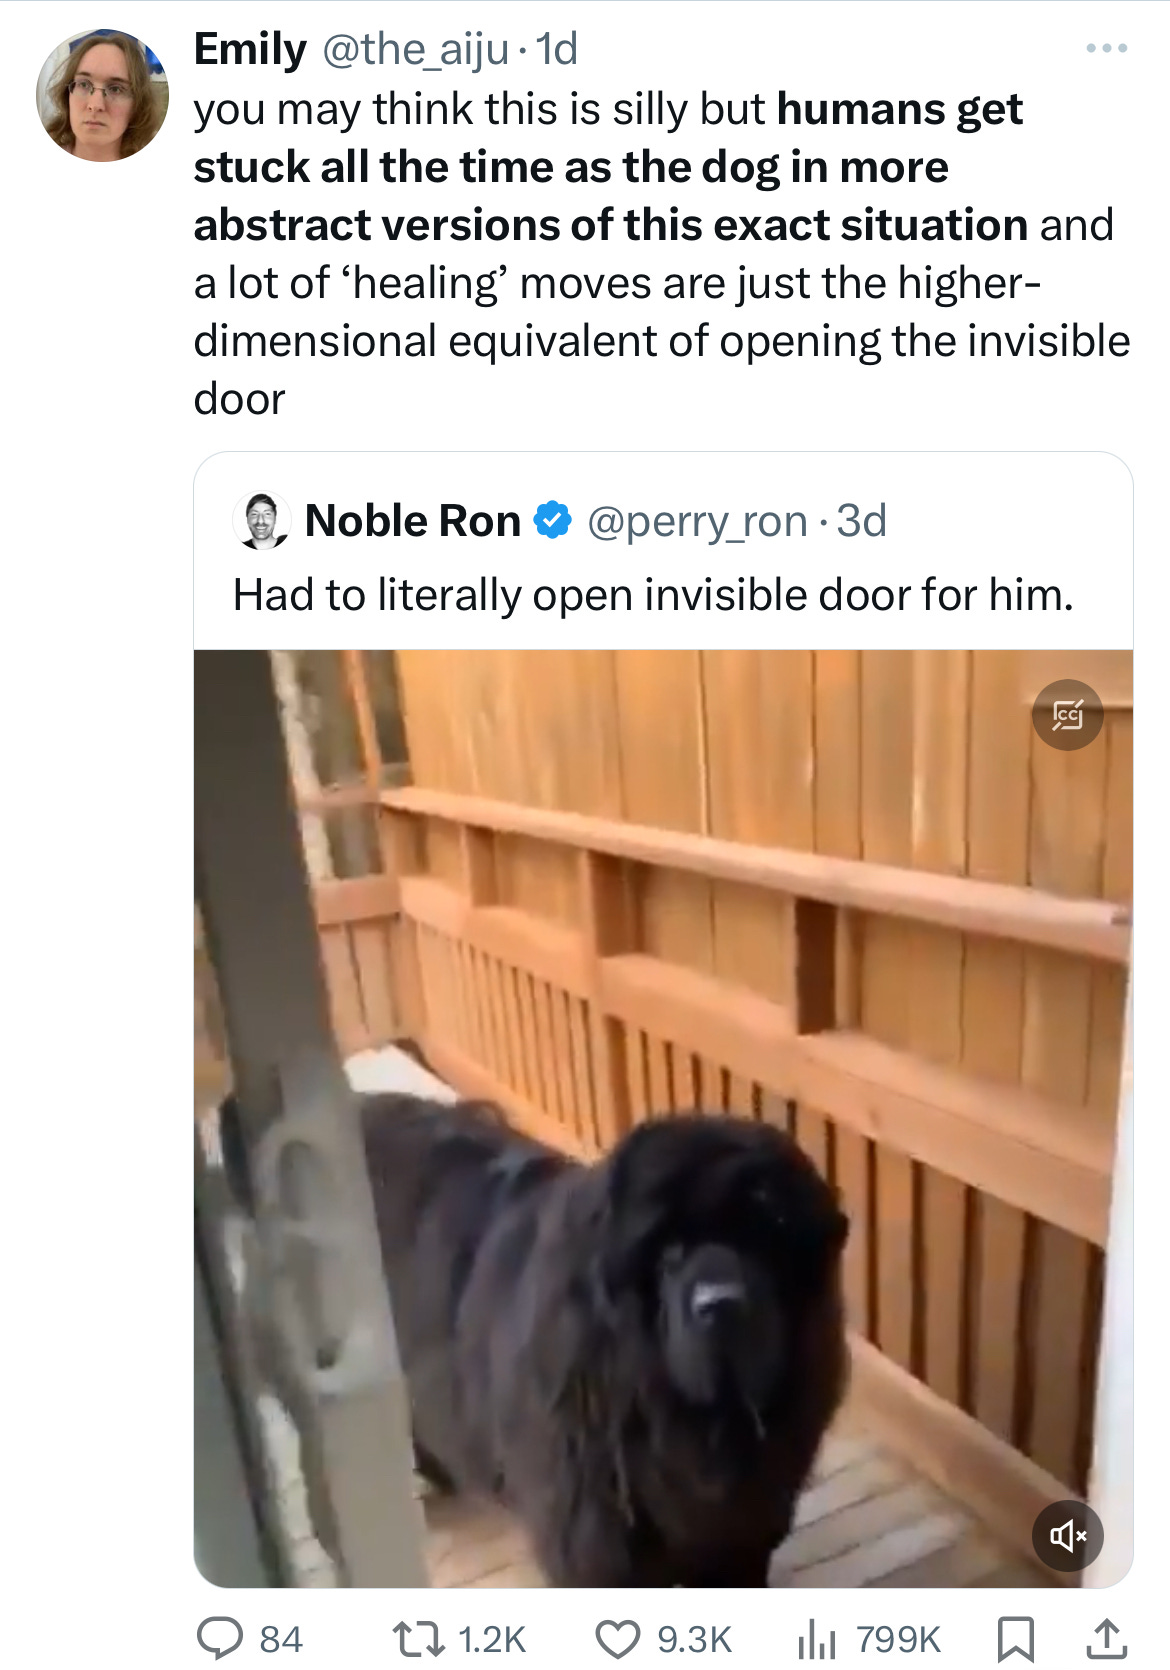 "you may think this is silly but humans get stuck all the time as the dog in more abstract versions of this exact situation and a lot of ‘healing’ moves are just the higher-dimensional equivalent of opening the invisible door"